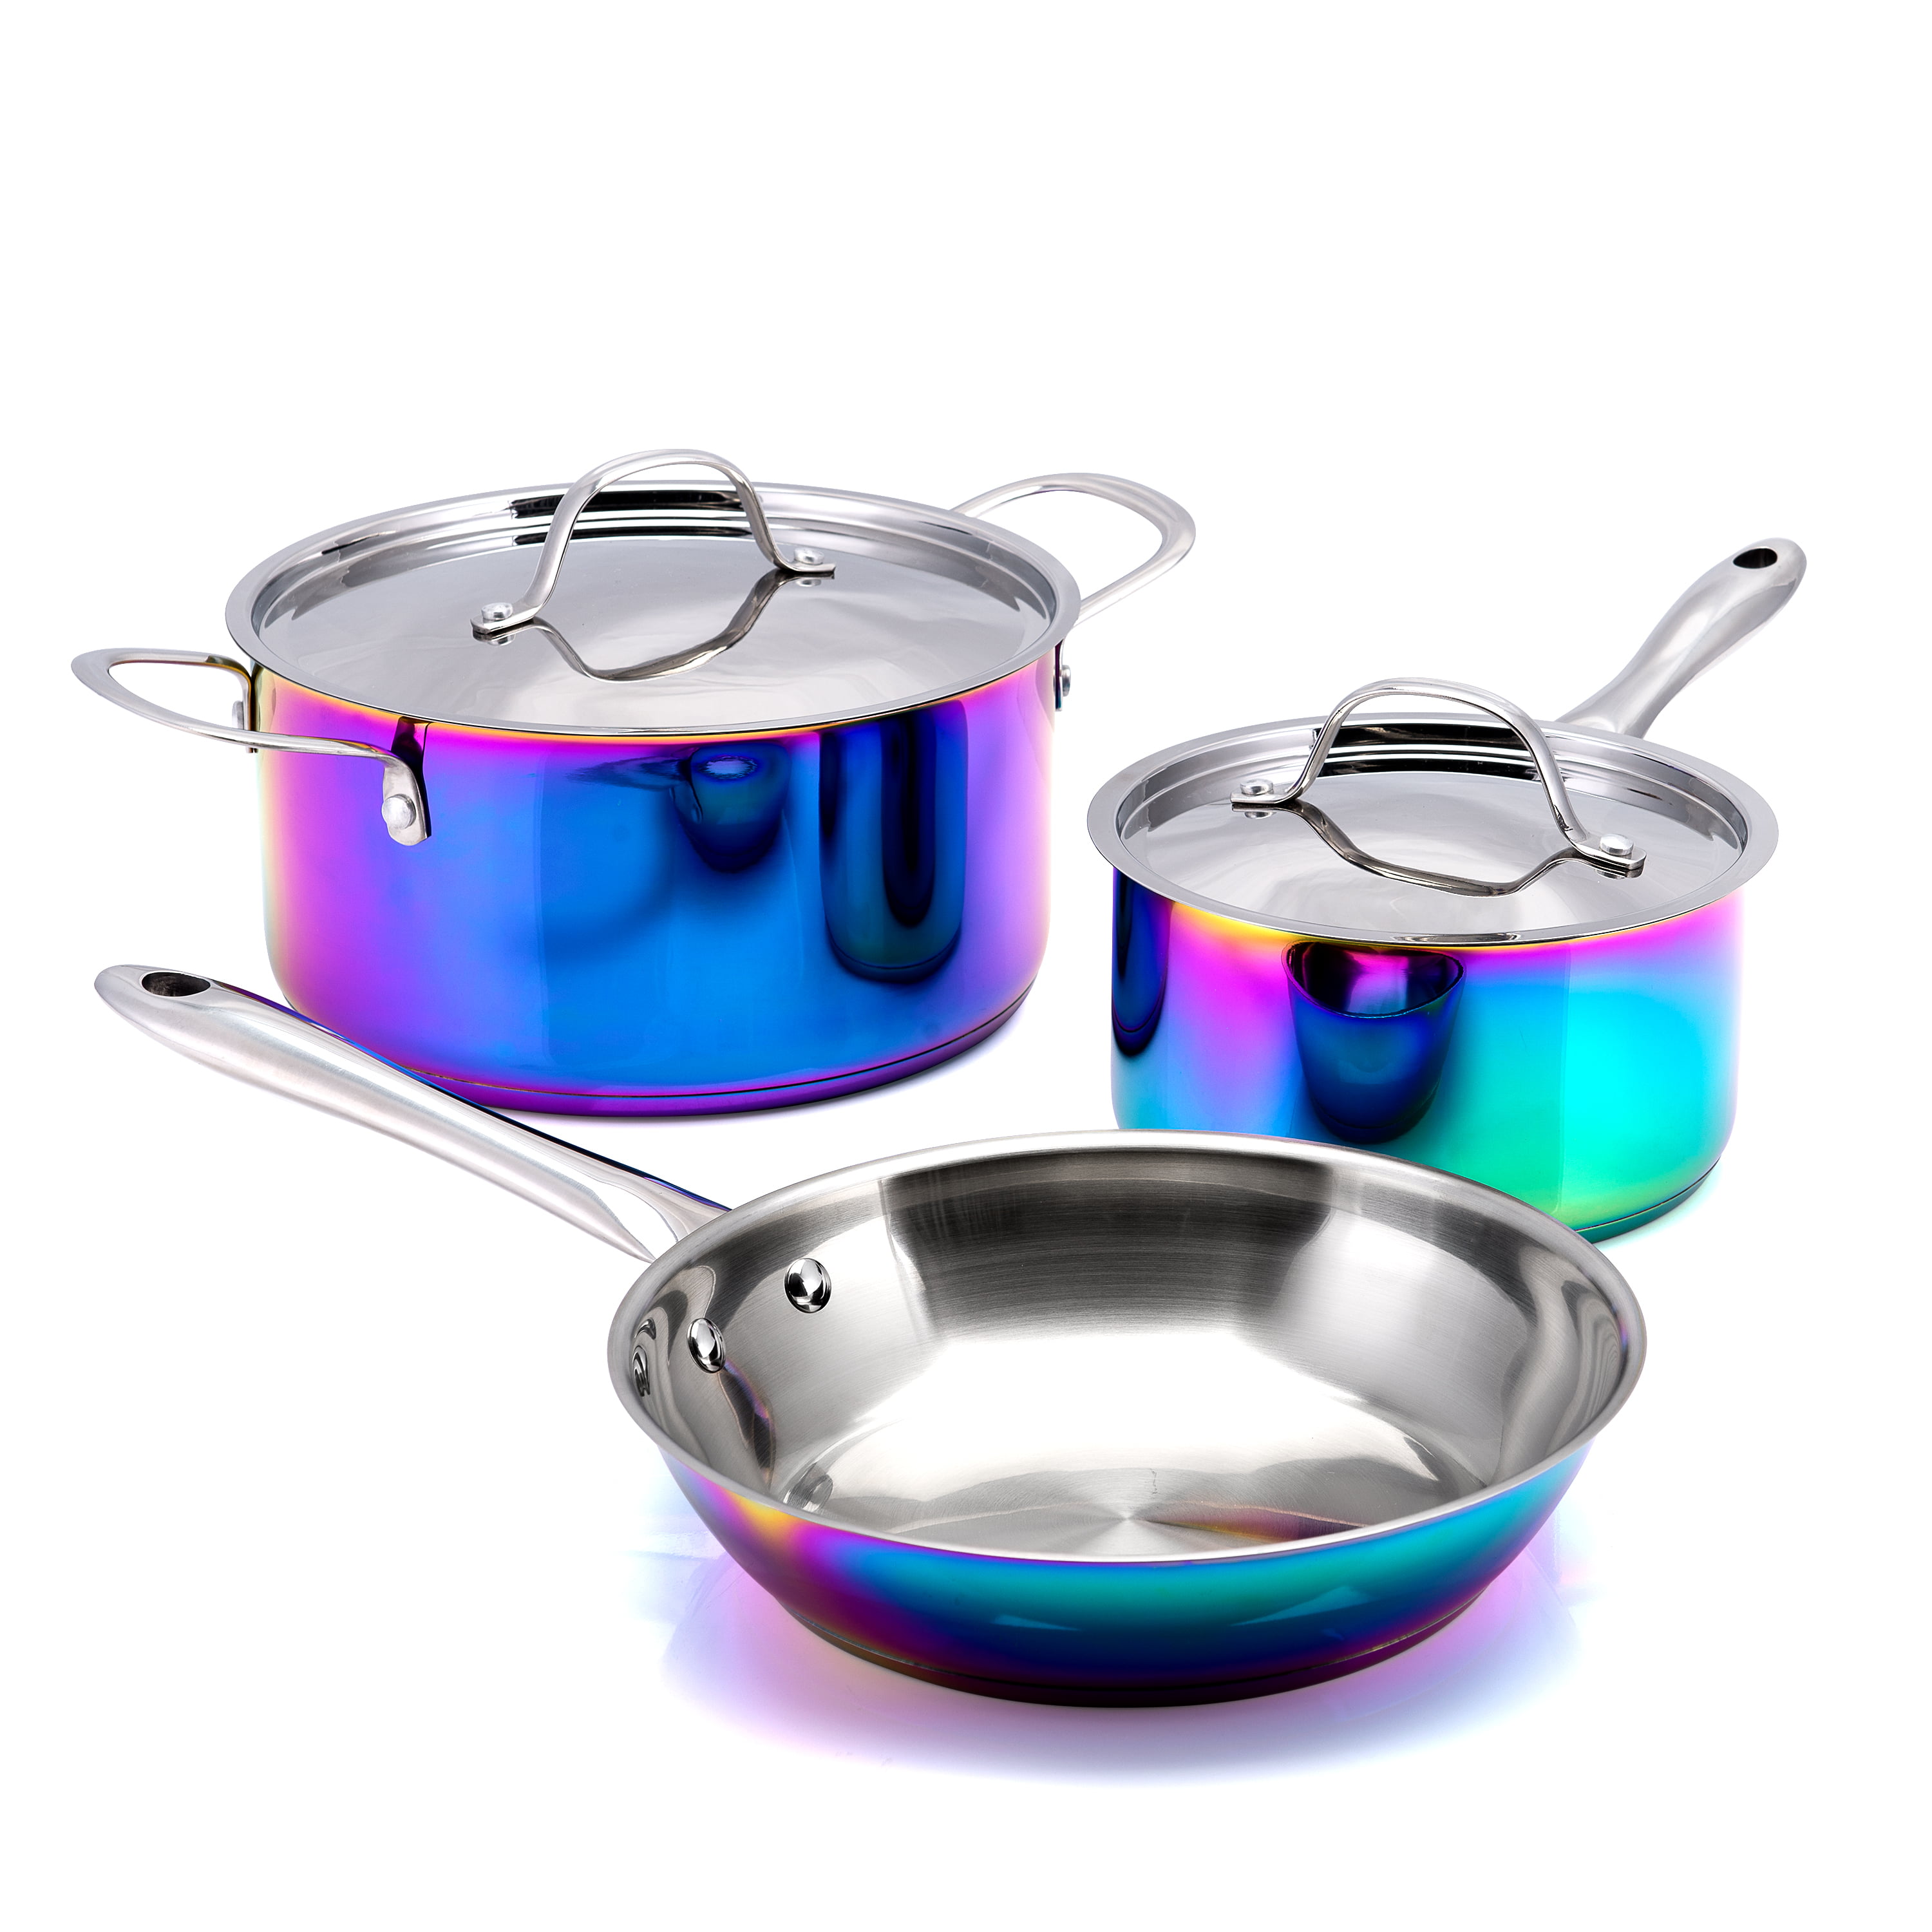 Mainstays Iridescent Stainless Steel 20-Piece Cookware Set Utensils and Tools